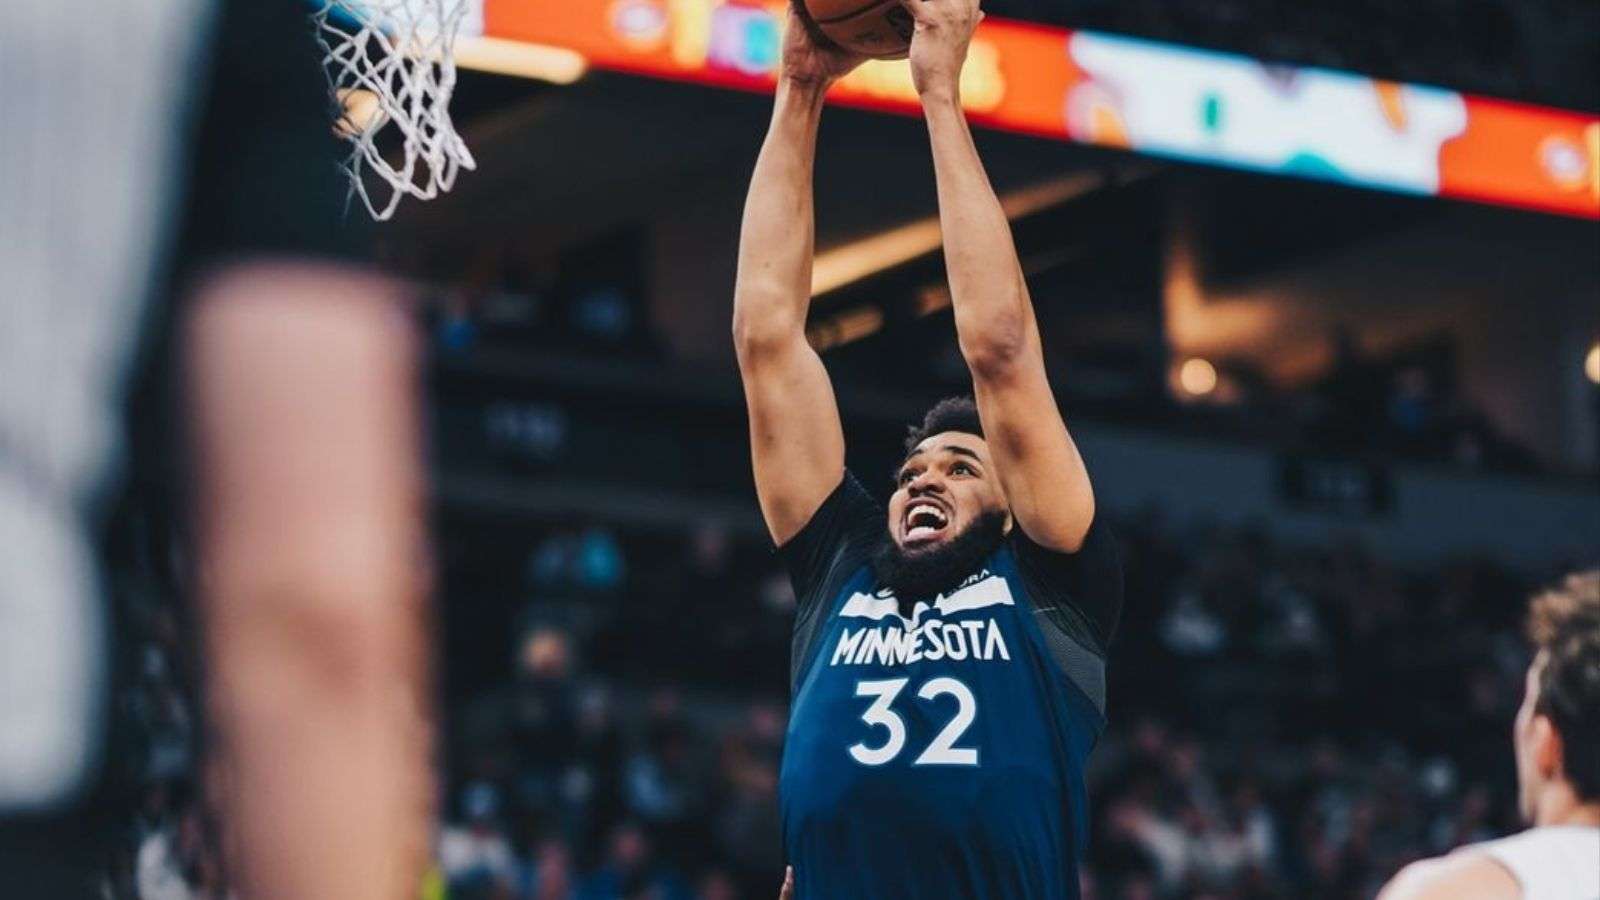 Karl-Anthony going up for a slam dunk as a member of the Minnesota Timberwolves.